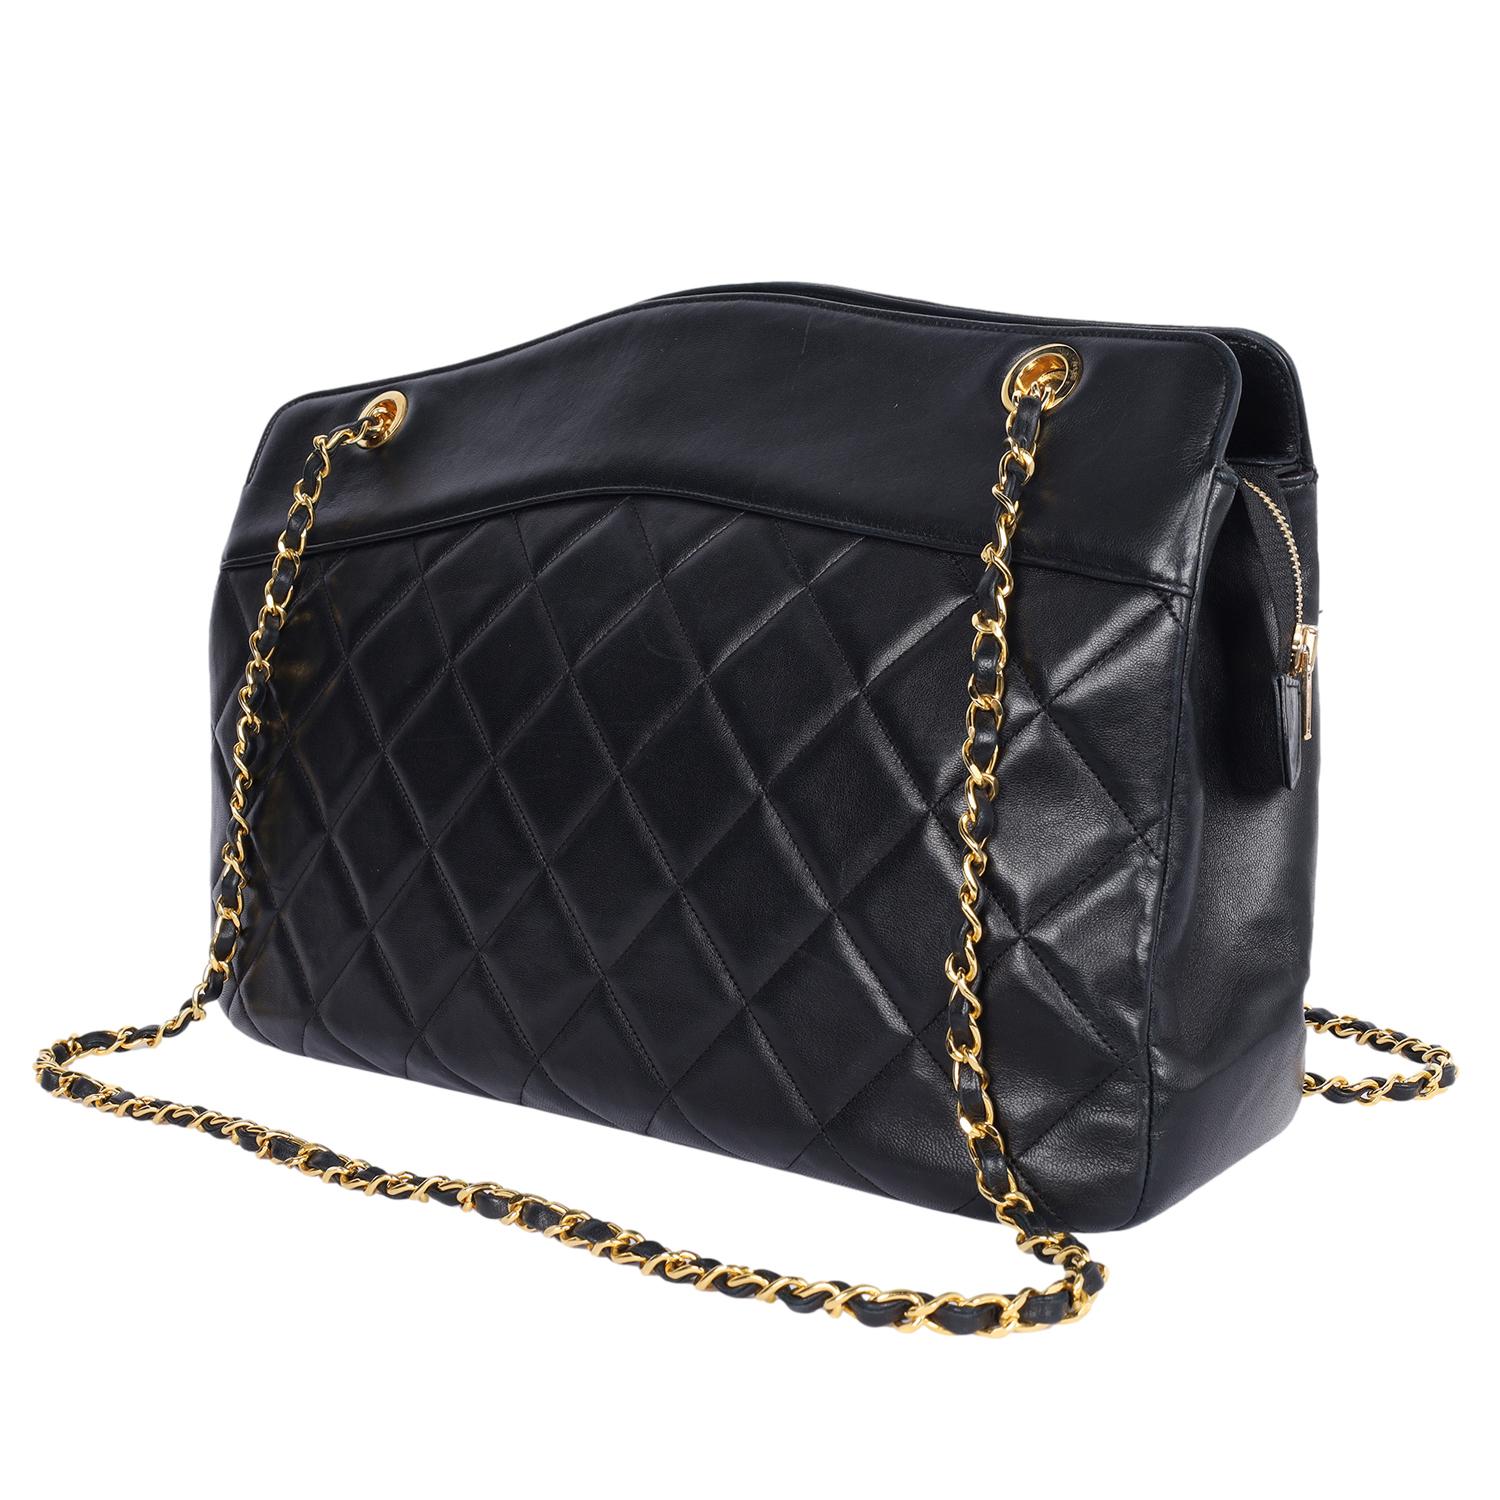 Chanel Black Quilted Lambskin Leather Crossbody Bag 1989 For Sale 6